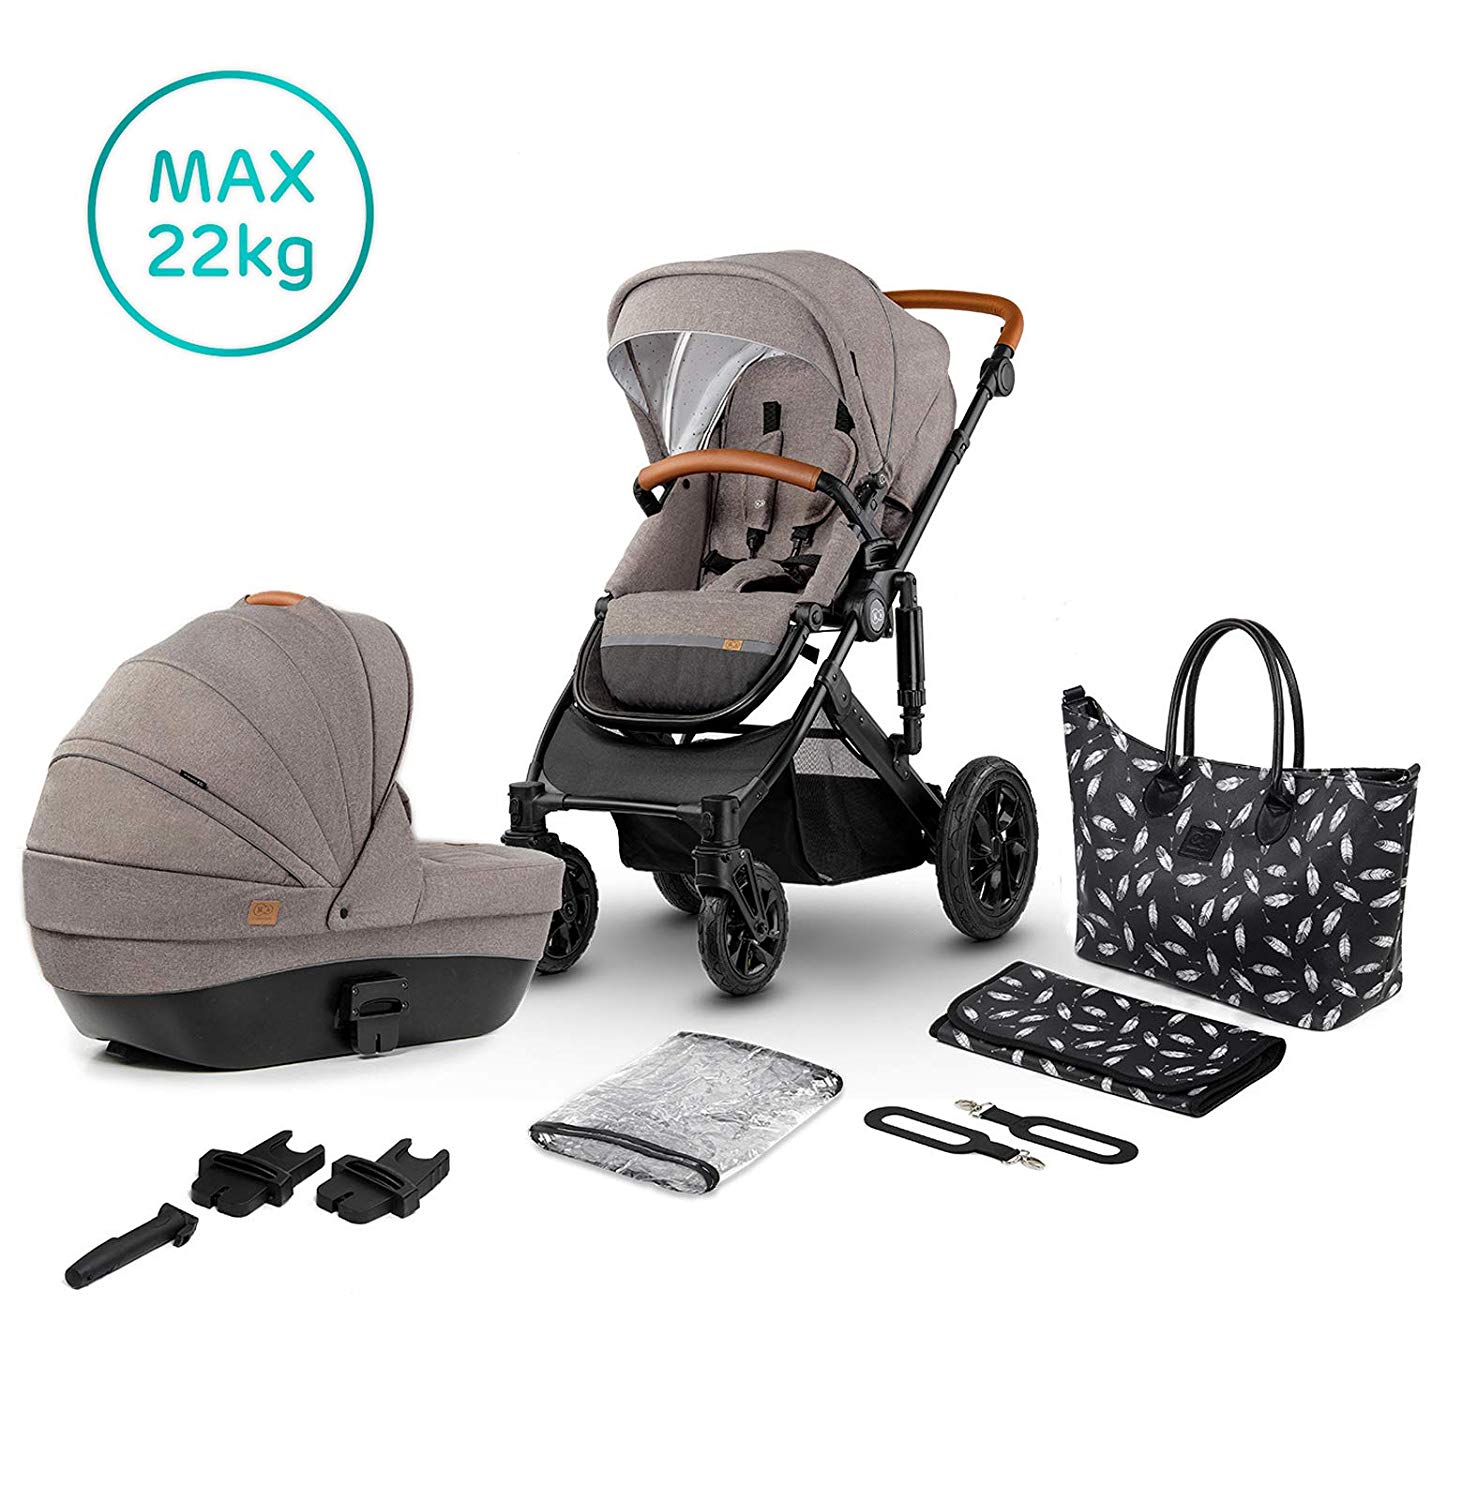 Kinderkraft Pram 2-in-1 Prime 2020 Pram Set Combination Pushchair Sports Pram Buggy and Carry Cot Large Wheels Pneumatic Tyres Comfortable Buggy Seat with Reclining Position Accessories, Beige